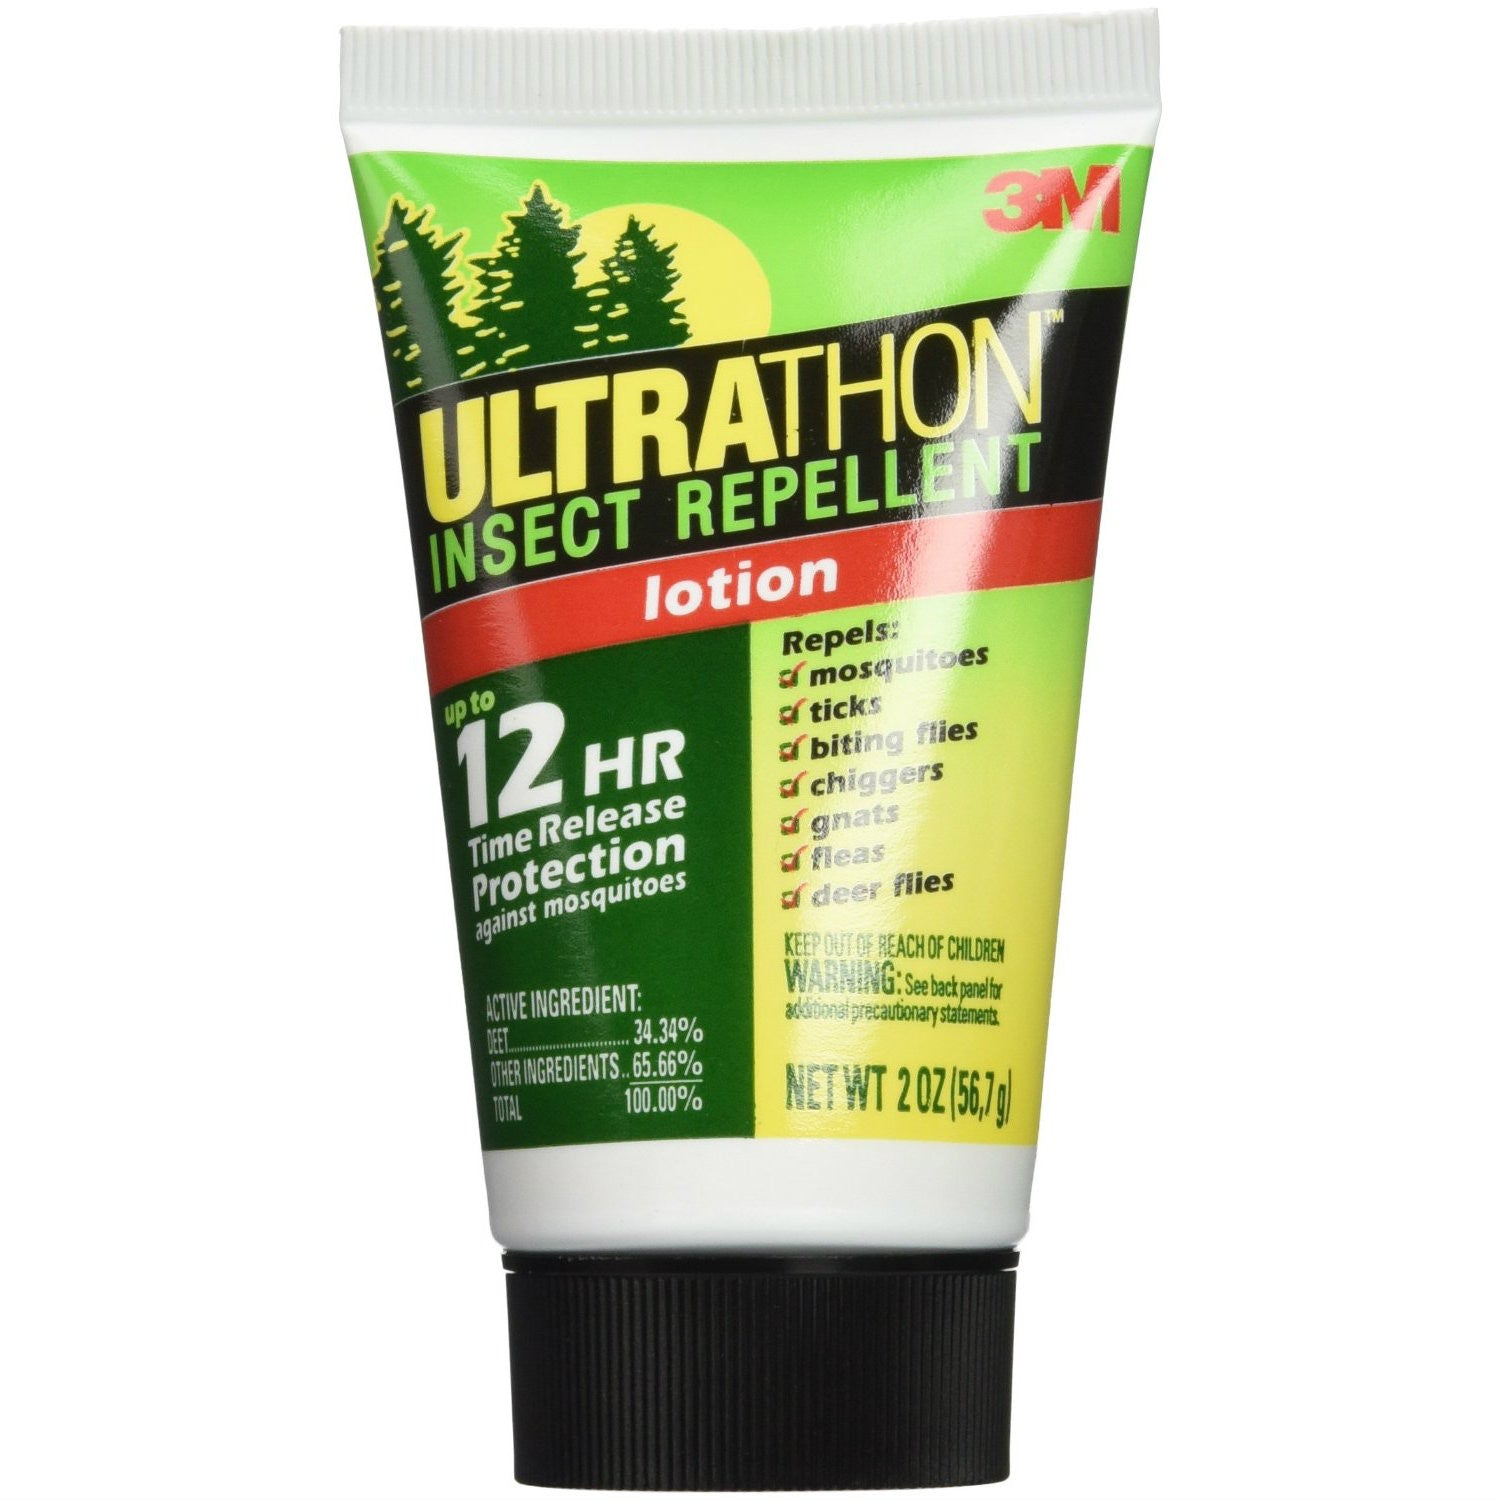 3M Ultrathon Insect Repellent Lotion 34.34% Deet 2 oz. - Indy Army Navy